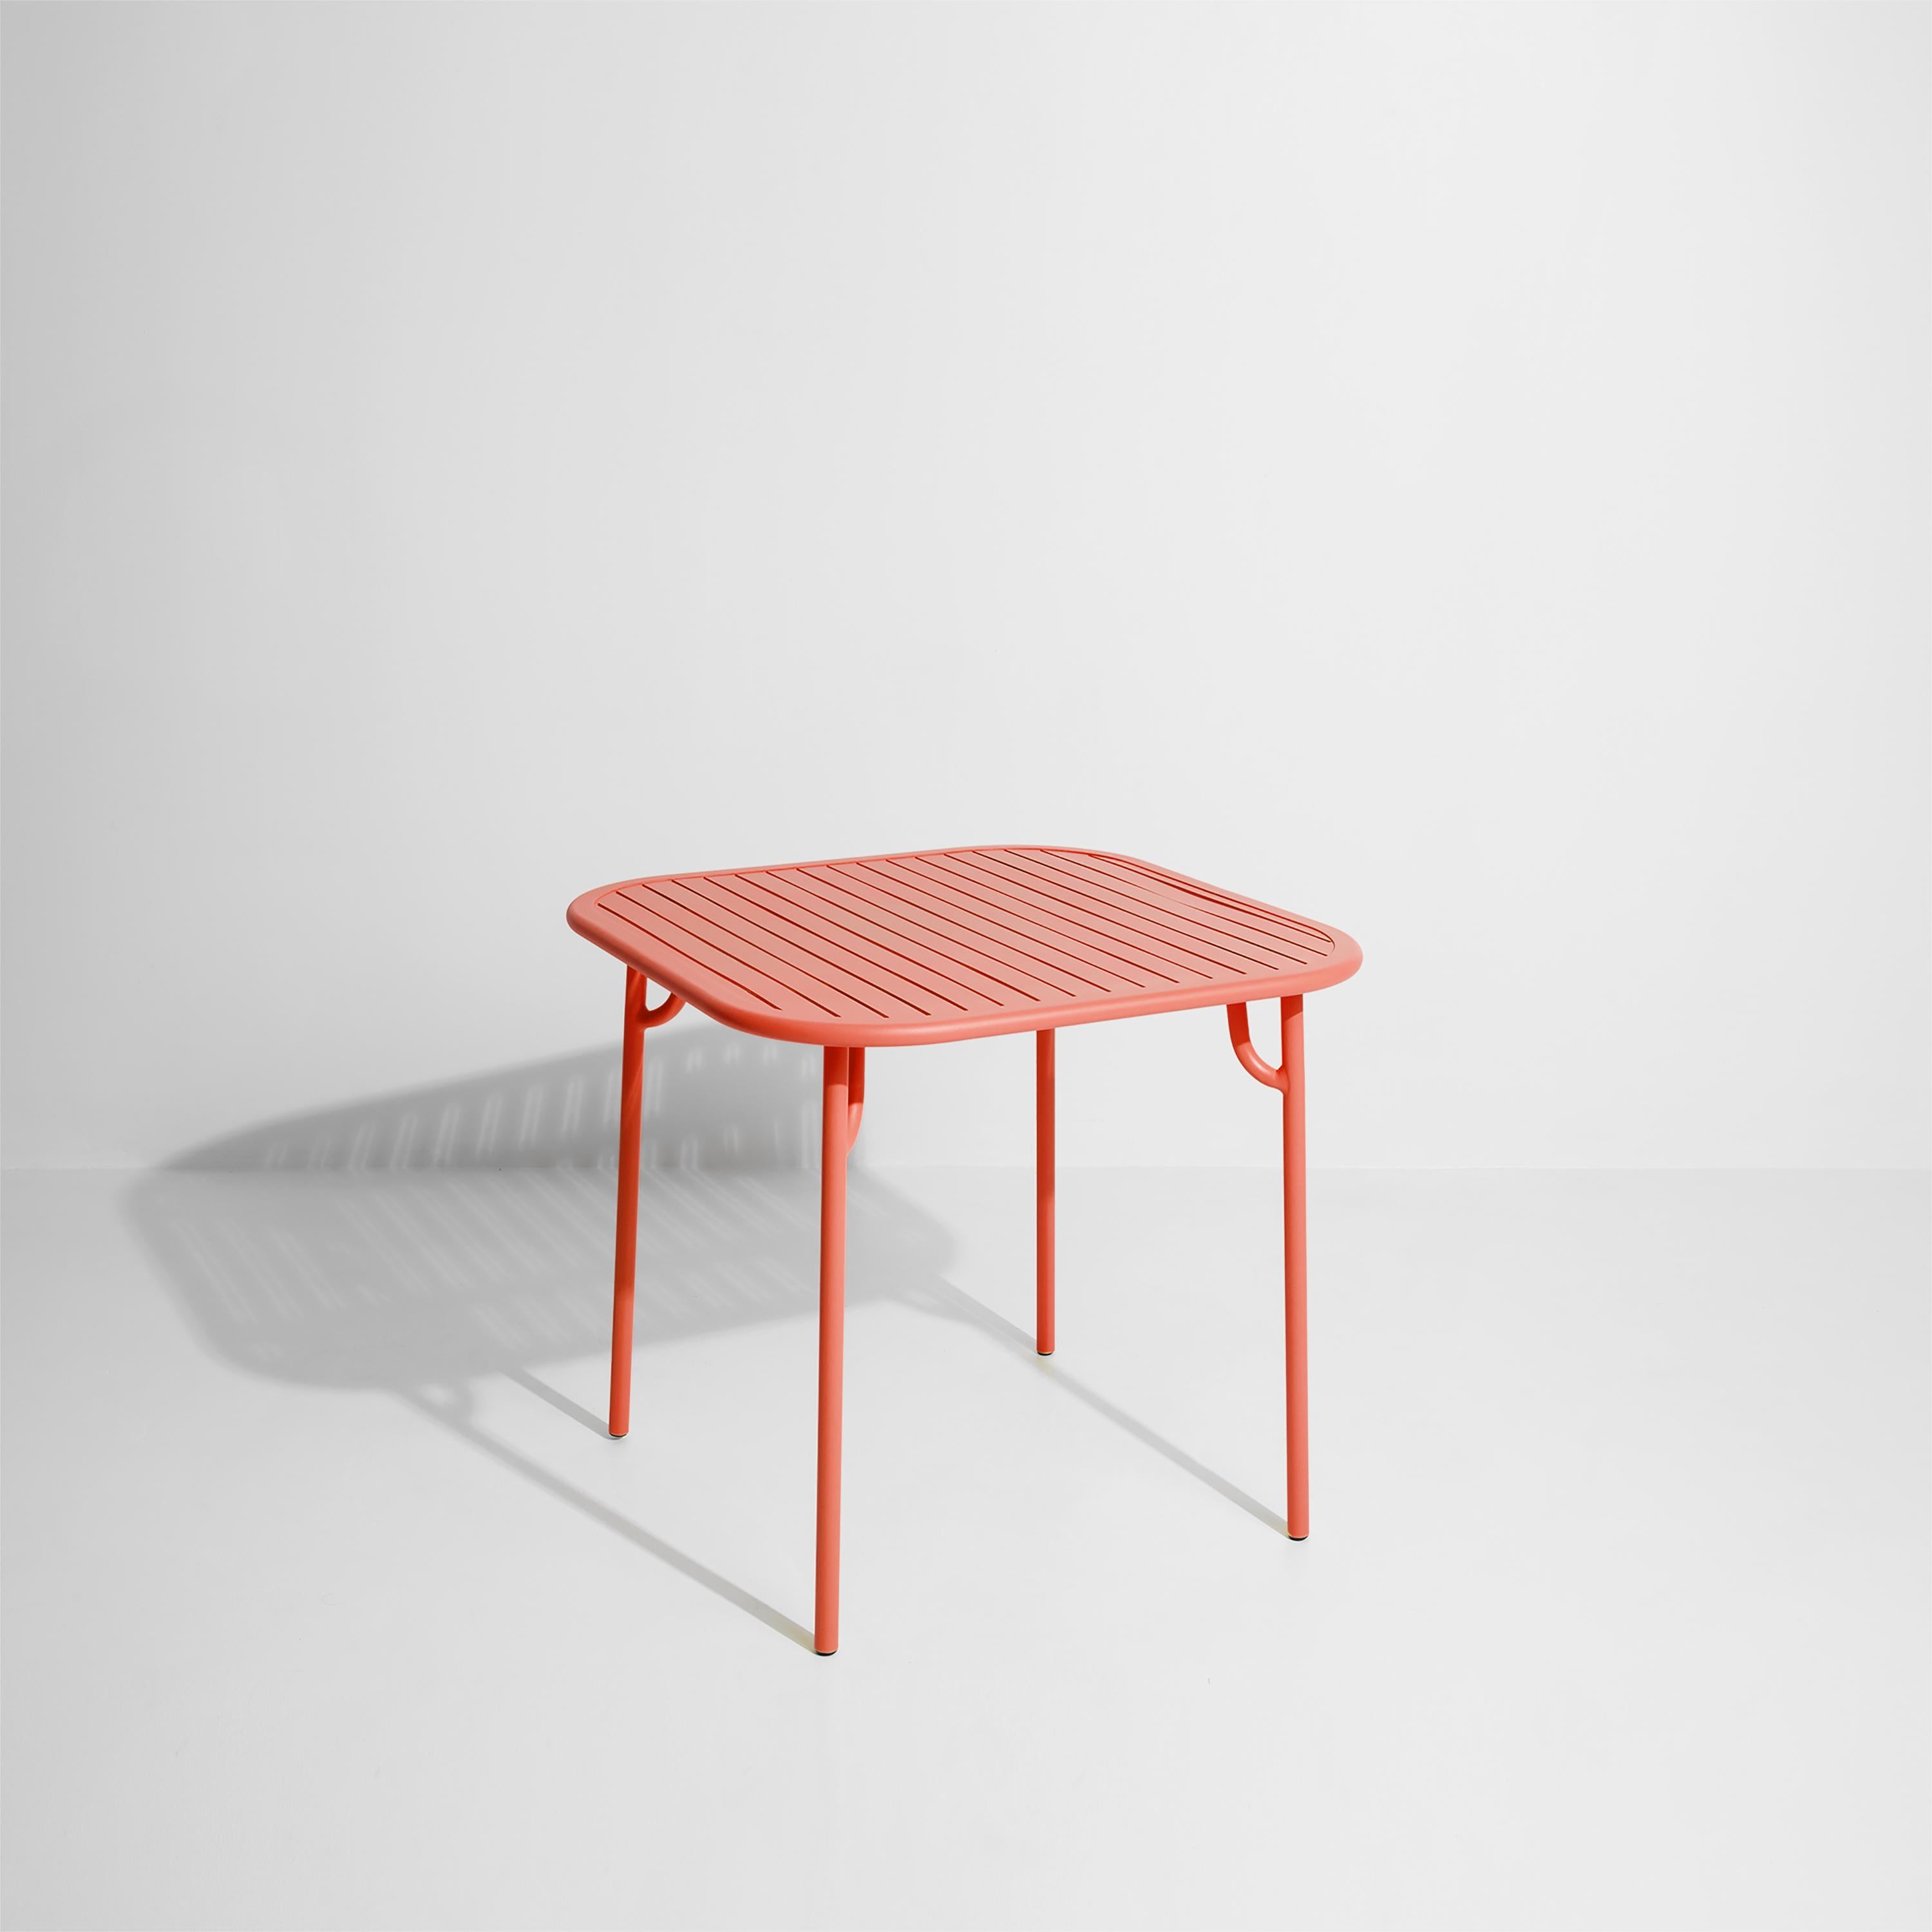 Petite Friture Week-End Square Dining Table in Coral Aluminium with Slats by Studio BrichetZiegler, 2017

The week-end collection is a full range of outdoor furniture, in aluminium grained epoxy paint, matt finish, that includes 18 functions and 8